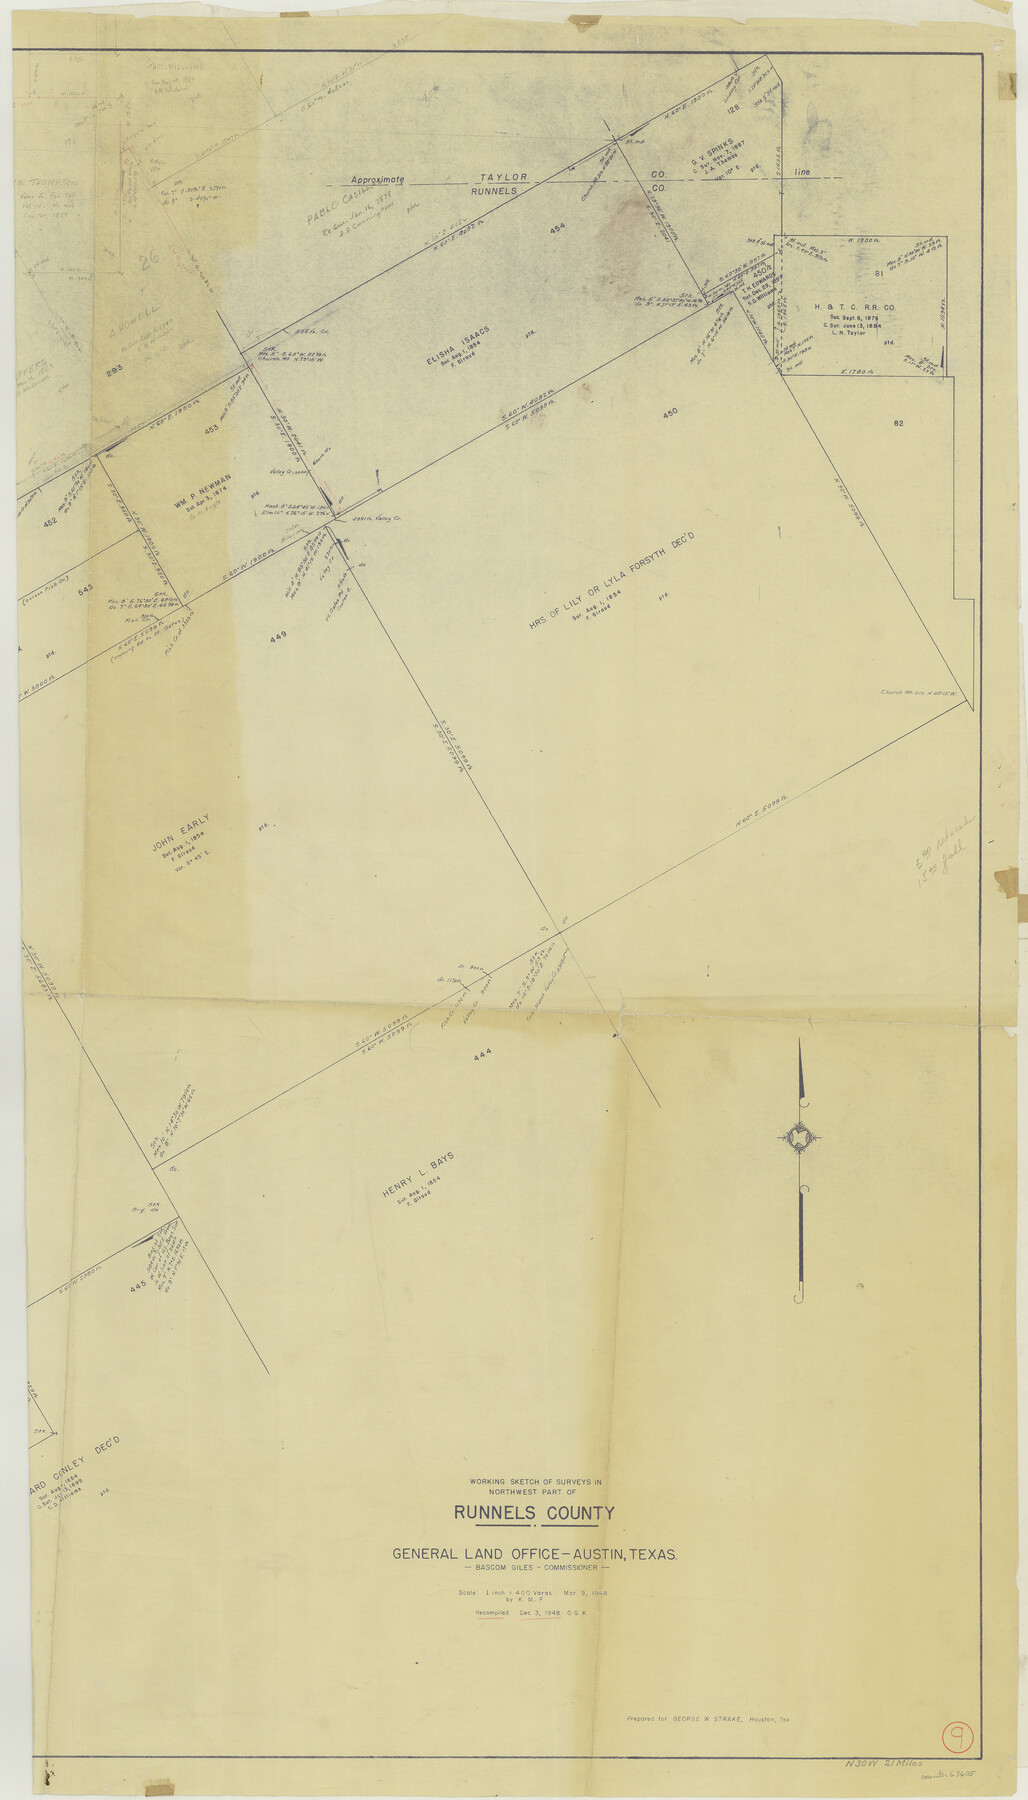 63605, Runnels County Working Sketch 9, General Map Collection